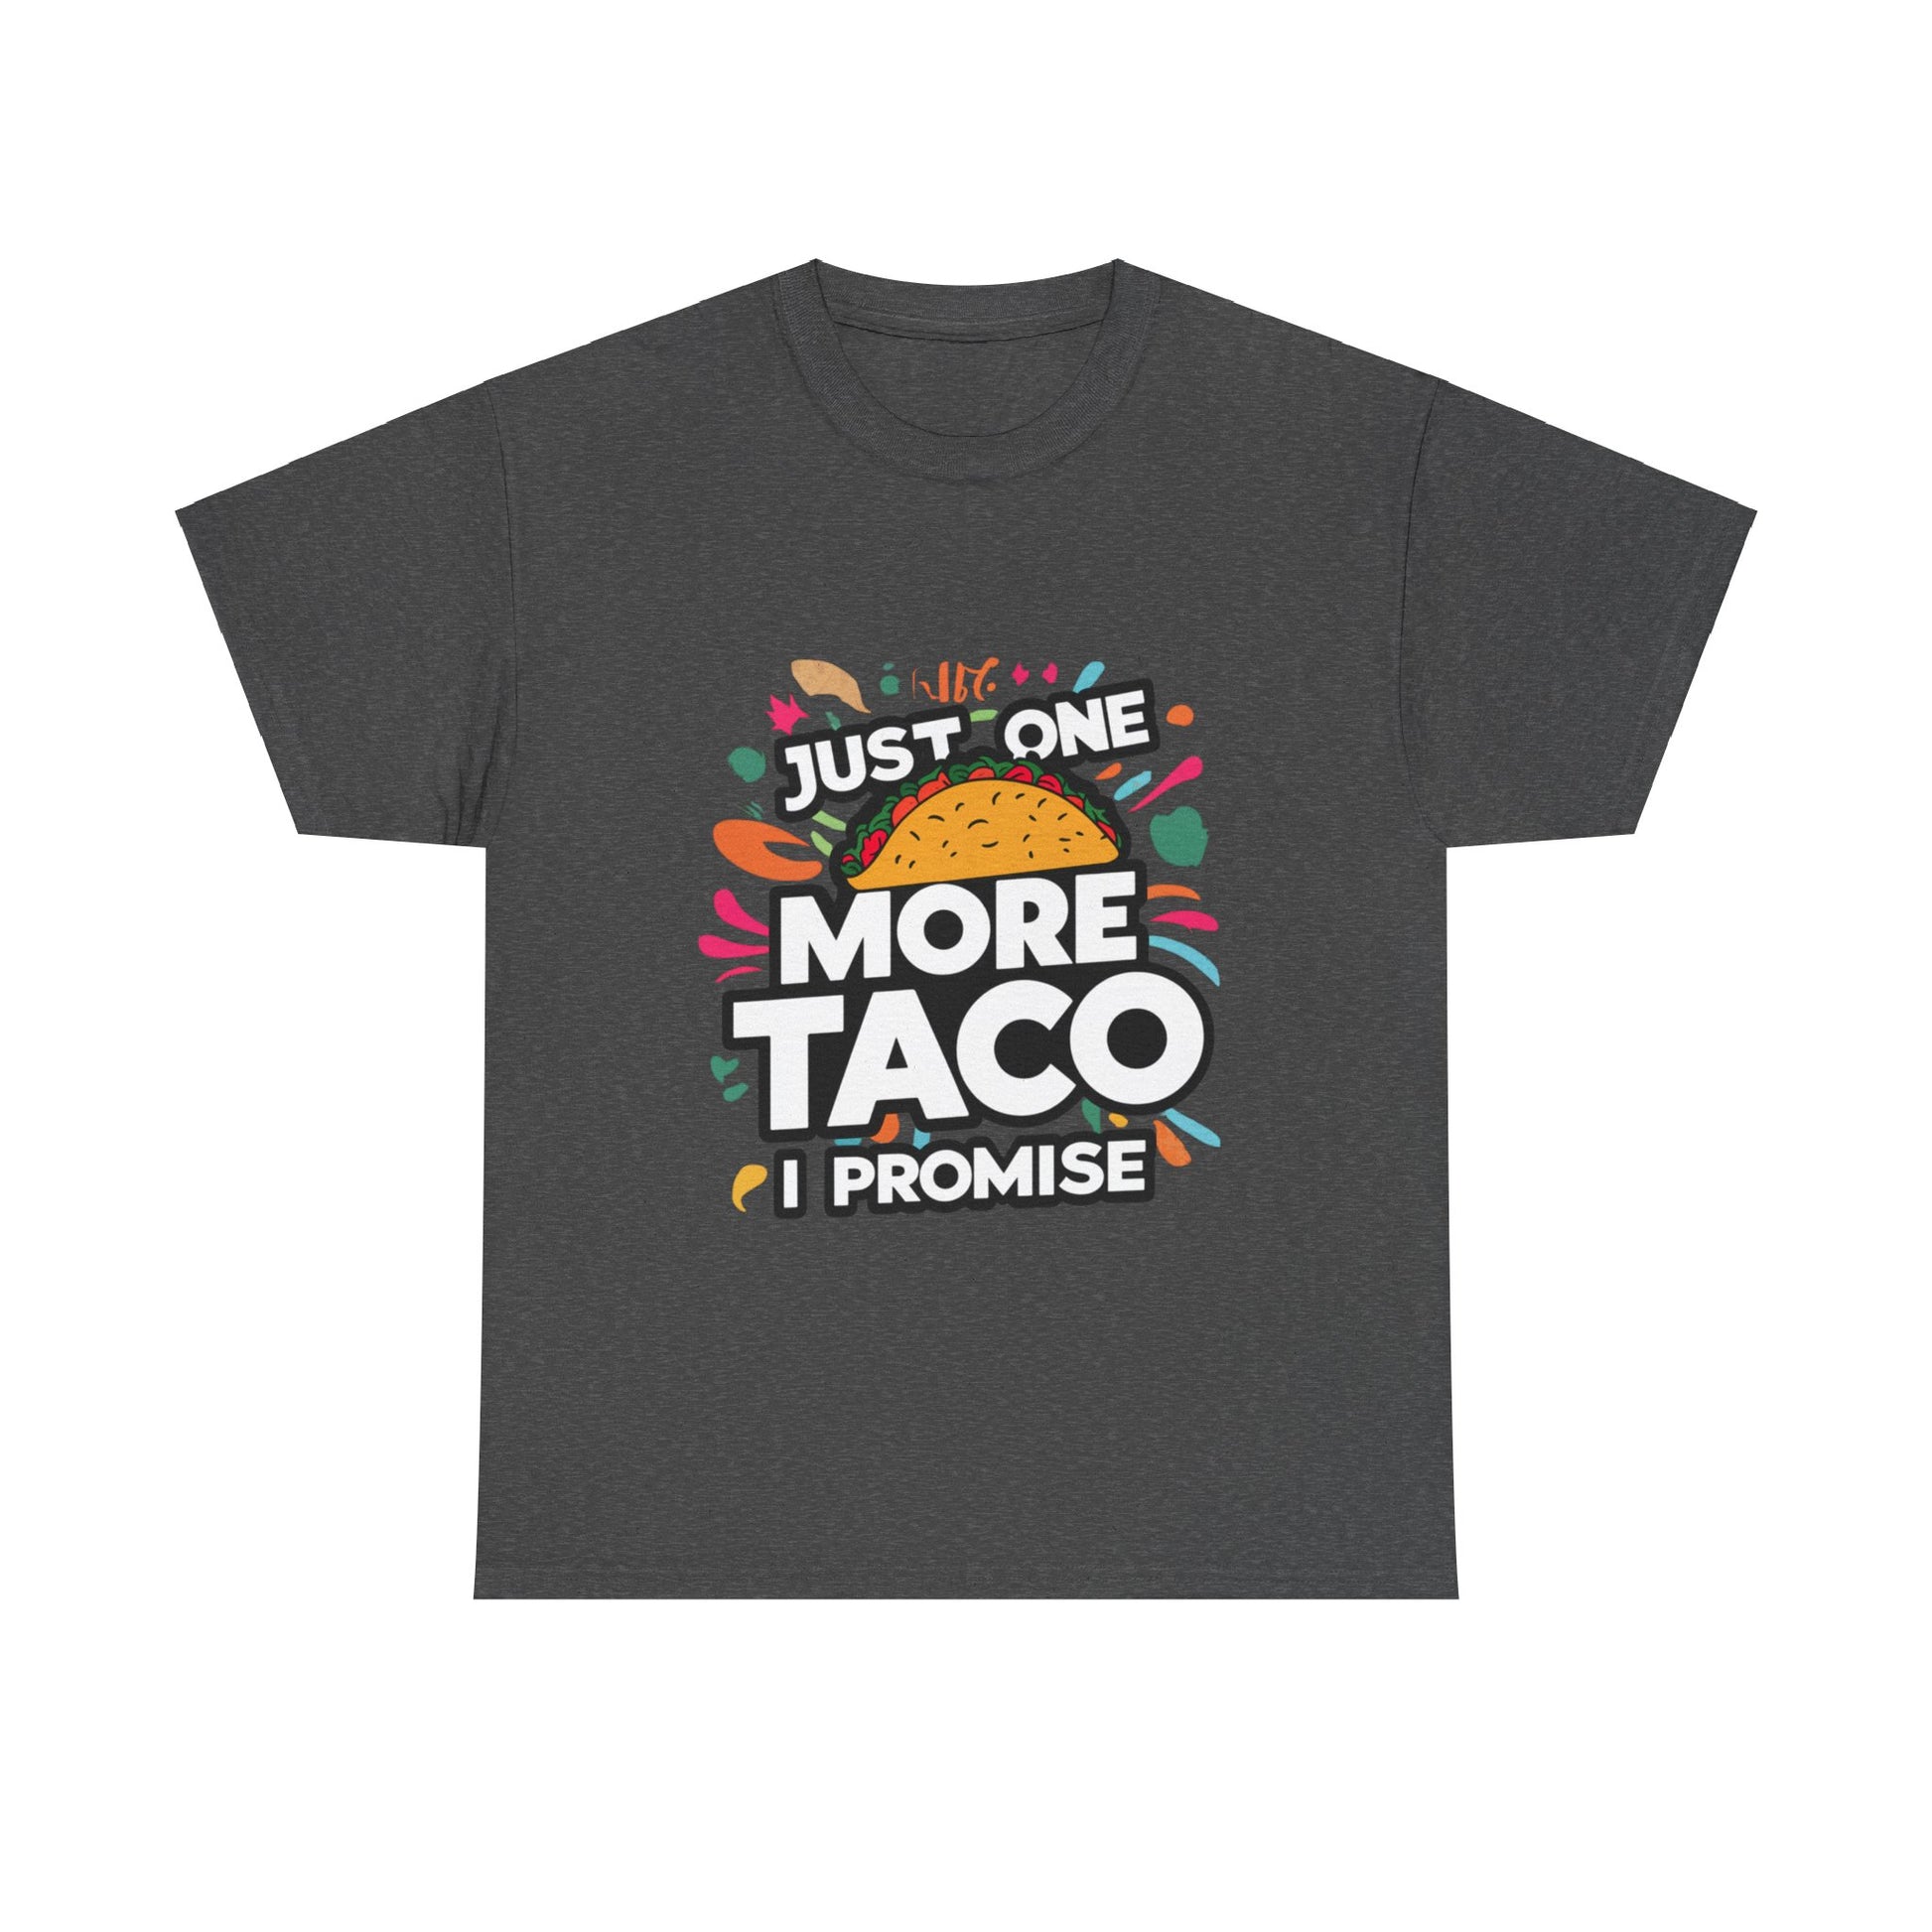 Just One More Taco I Promise Mexican Food Graphic Unisex Heavy Cotton Tee Cotton Funny Humorous Graphic Soft Premium Unisex Men Women Dark Heather T-shirt Birthday Gift-4